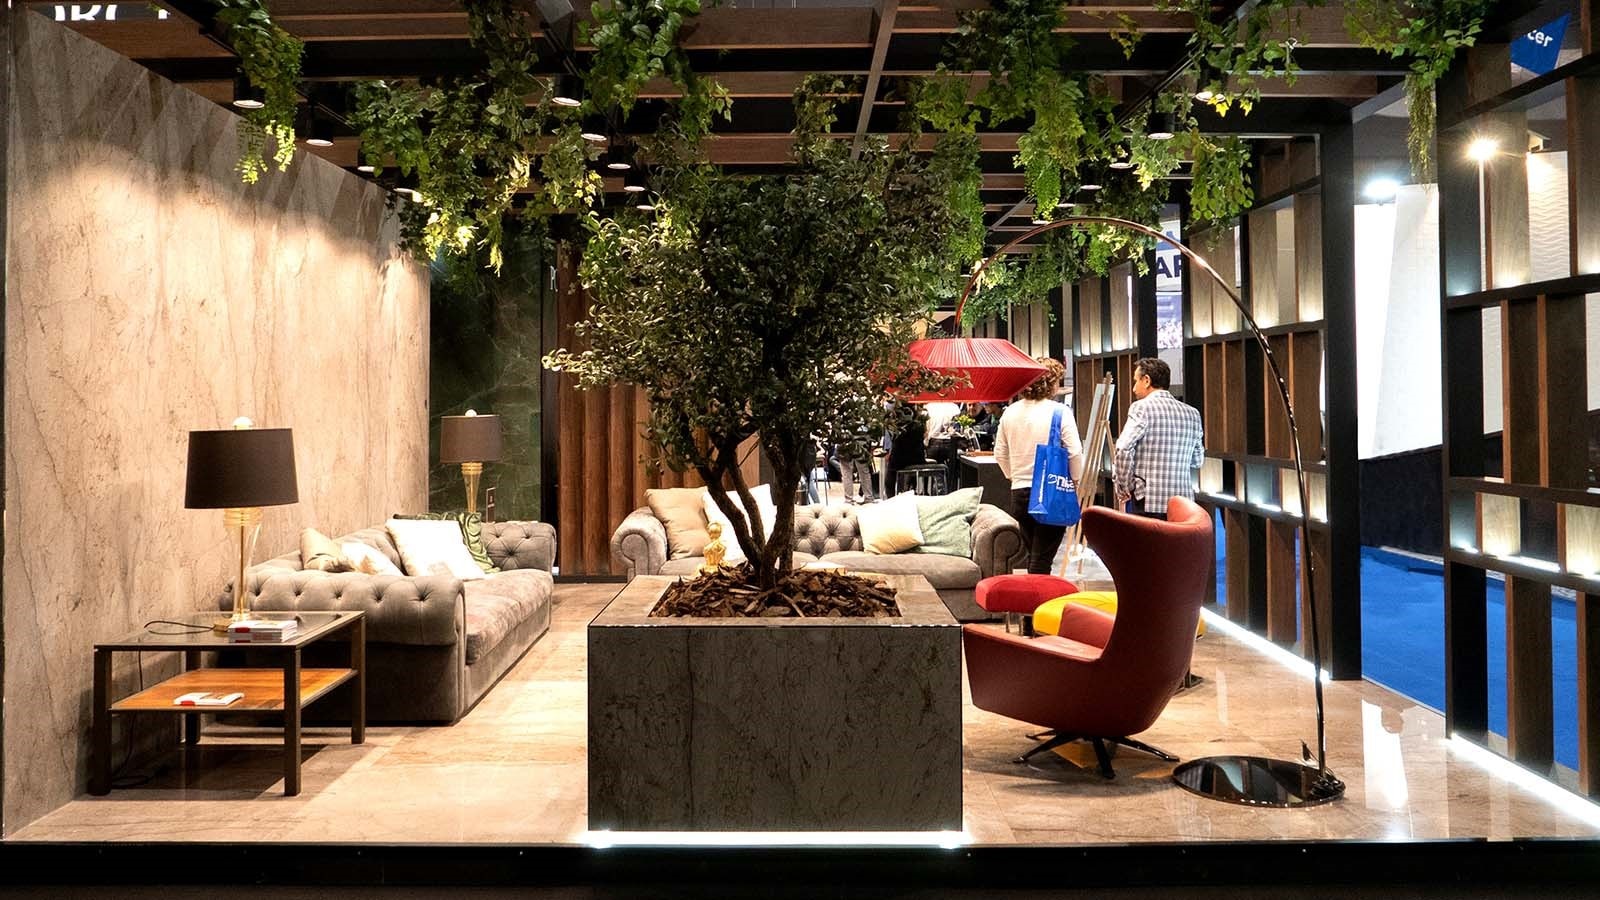 PORCELANOSA strengthens its commitment to sustainability at the Obra Blanca Expo